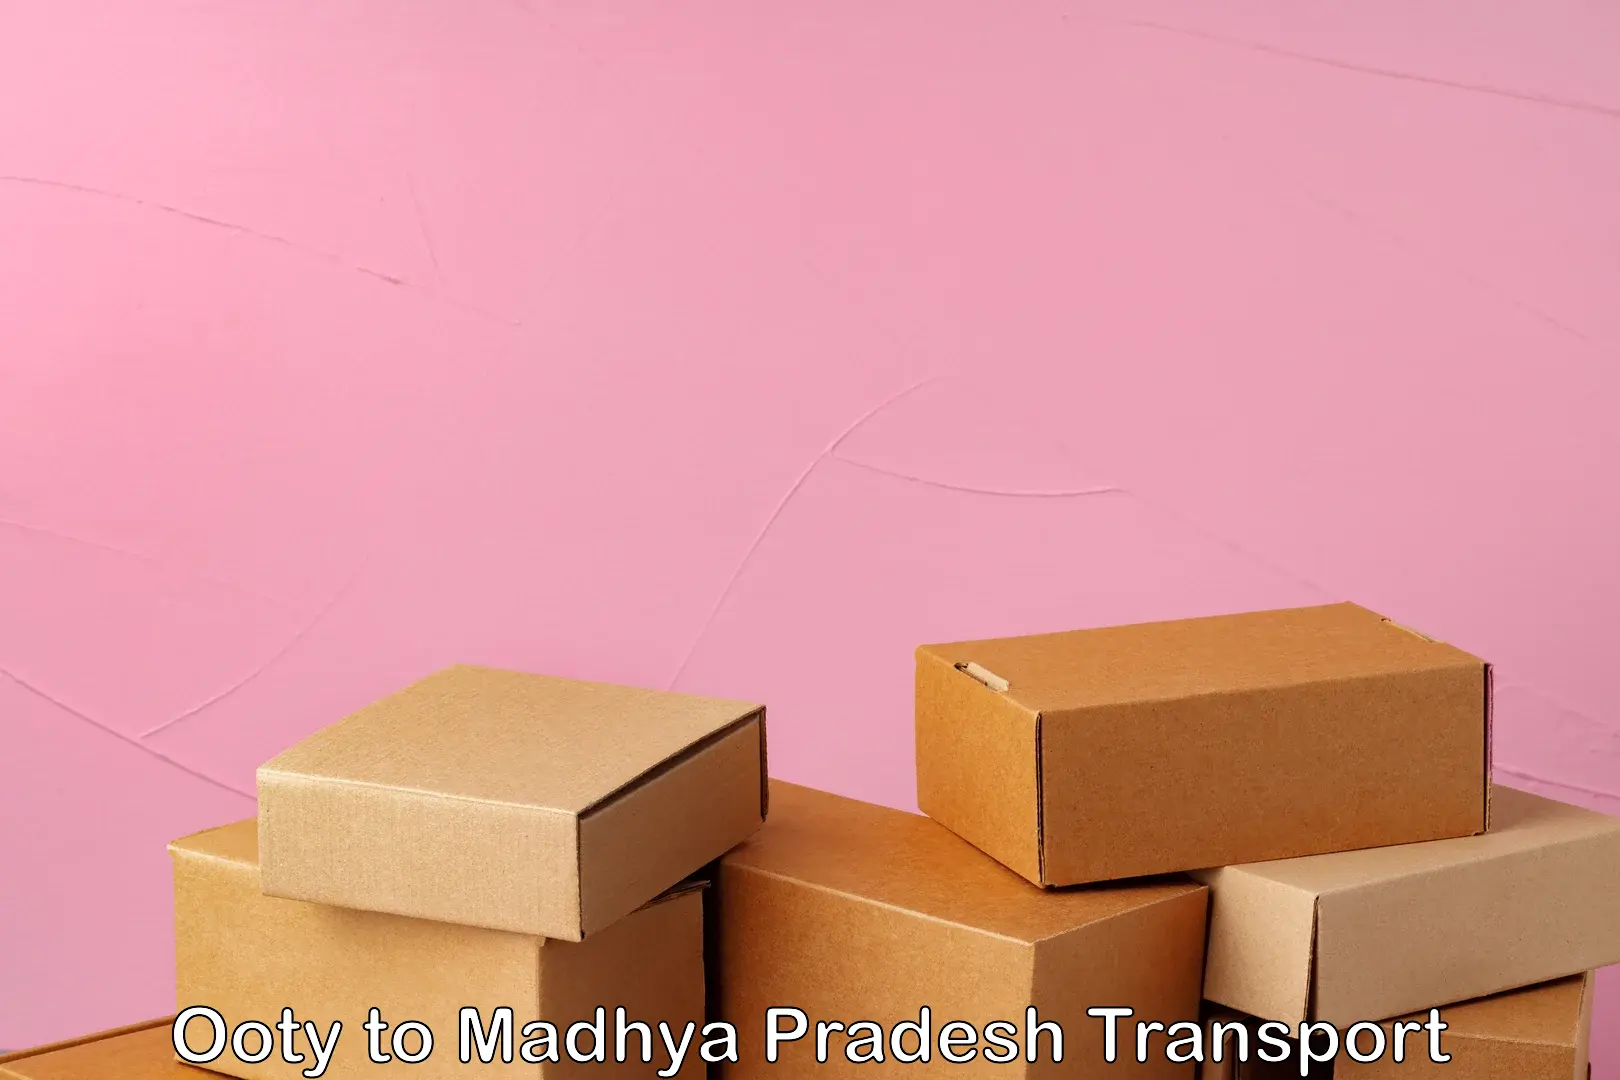 Parcel transport services Ooty to Pandhurna